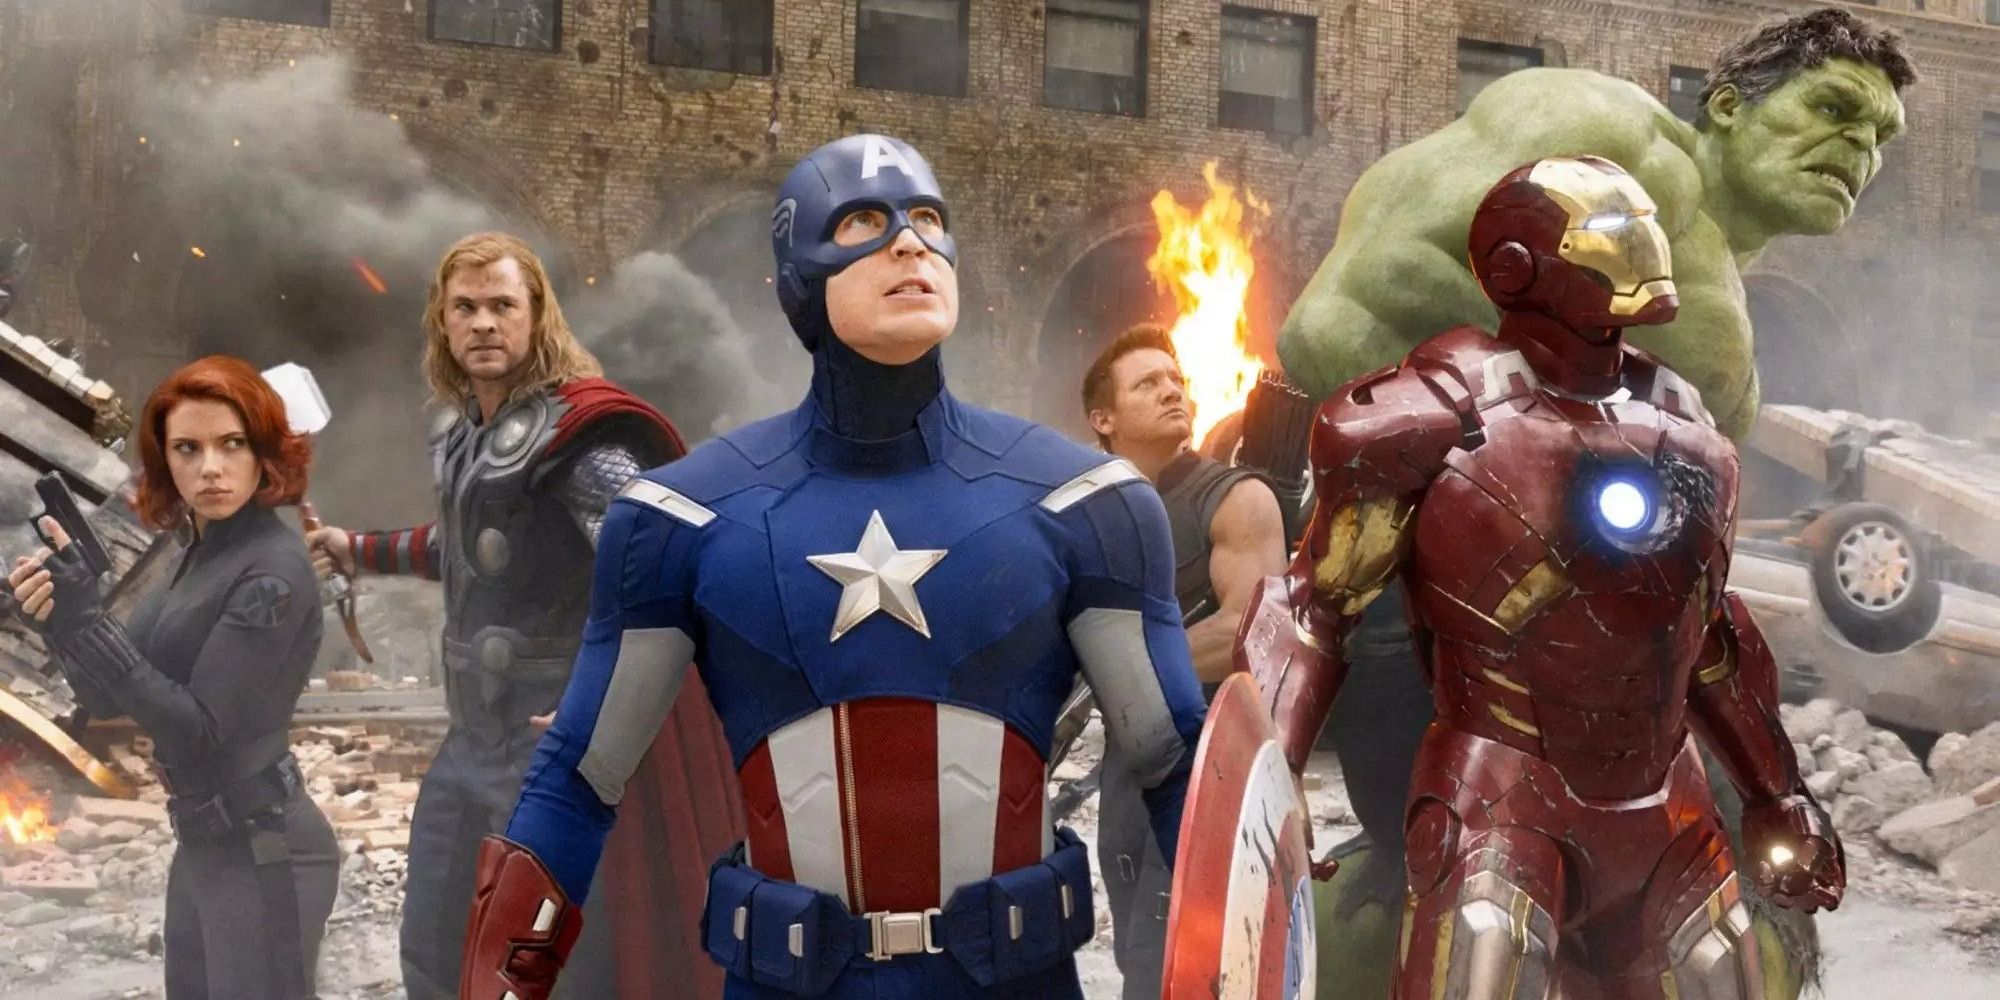 The Avengers assemble in New York City